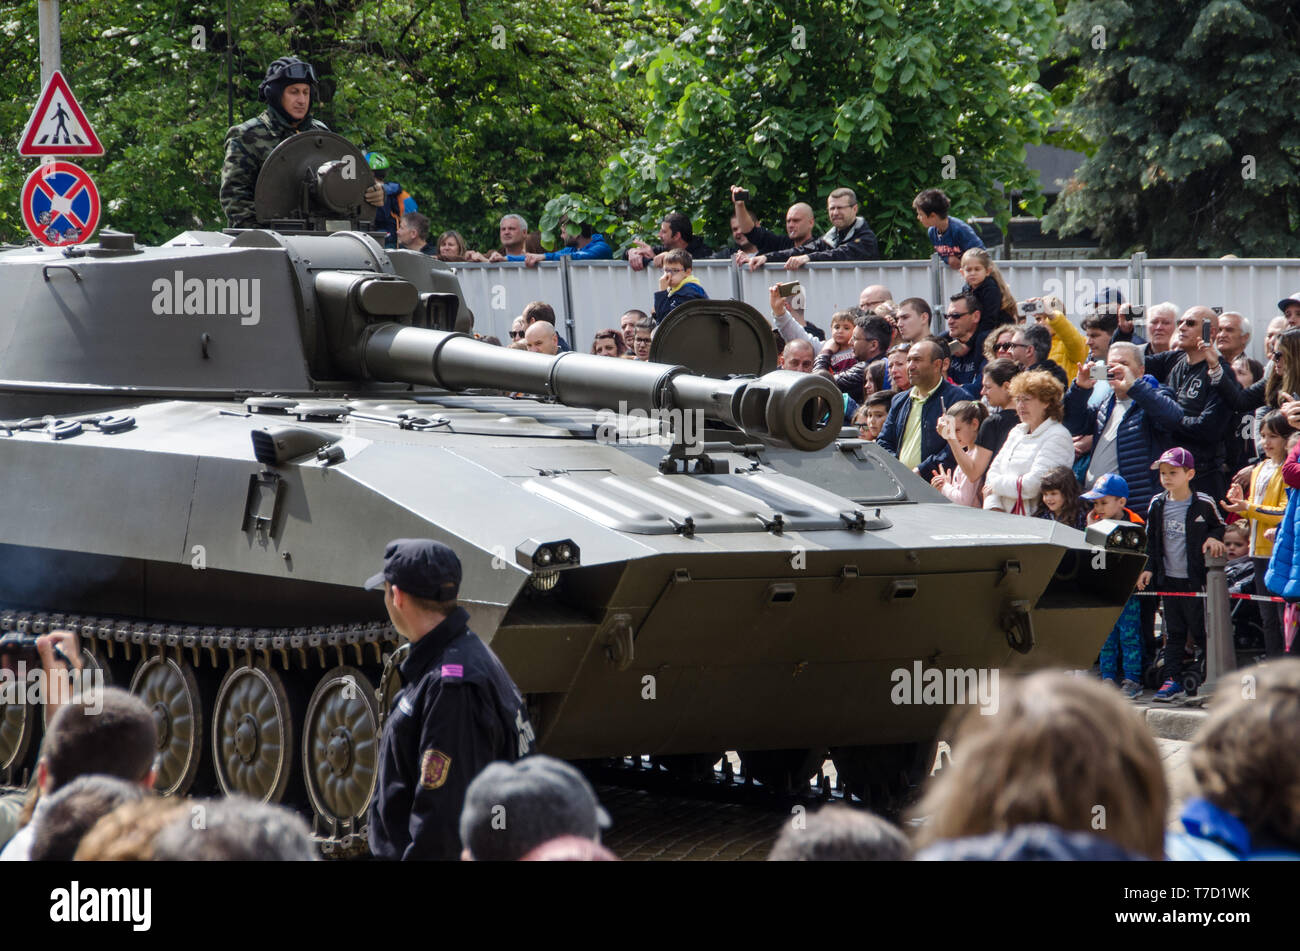 Sofia, Bulgaria – May, 06, 2019: St. George’s Day - Traditional Military parade in Sofia, Bulgaria on 6th of May – The Day of Bravery. Stock Photo